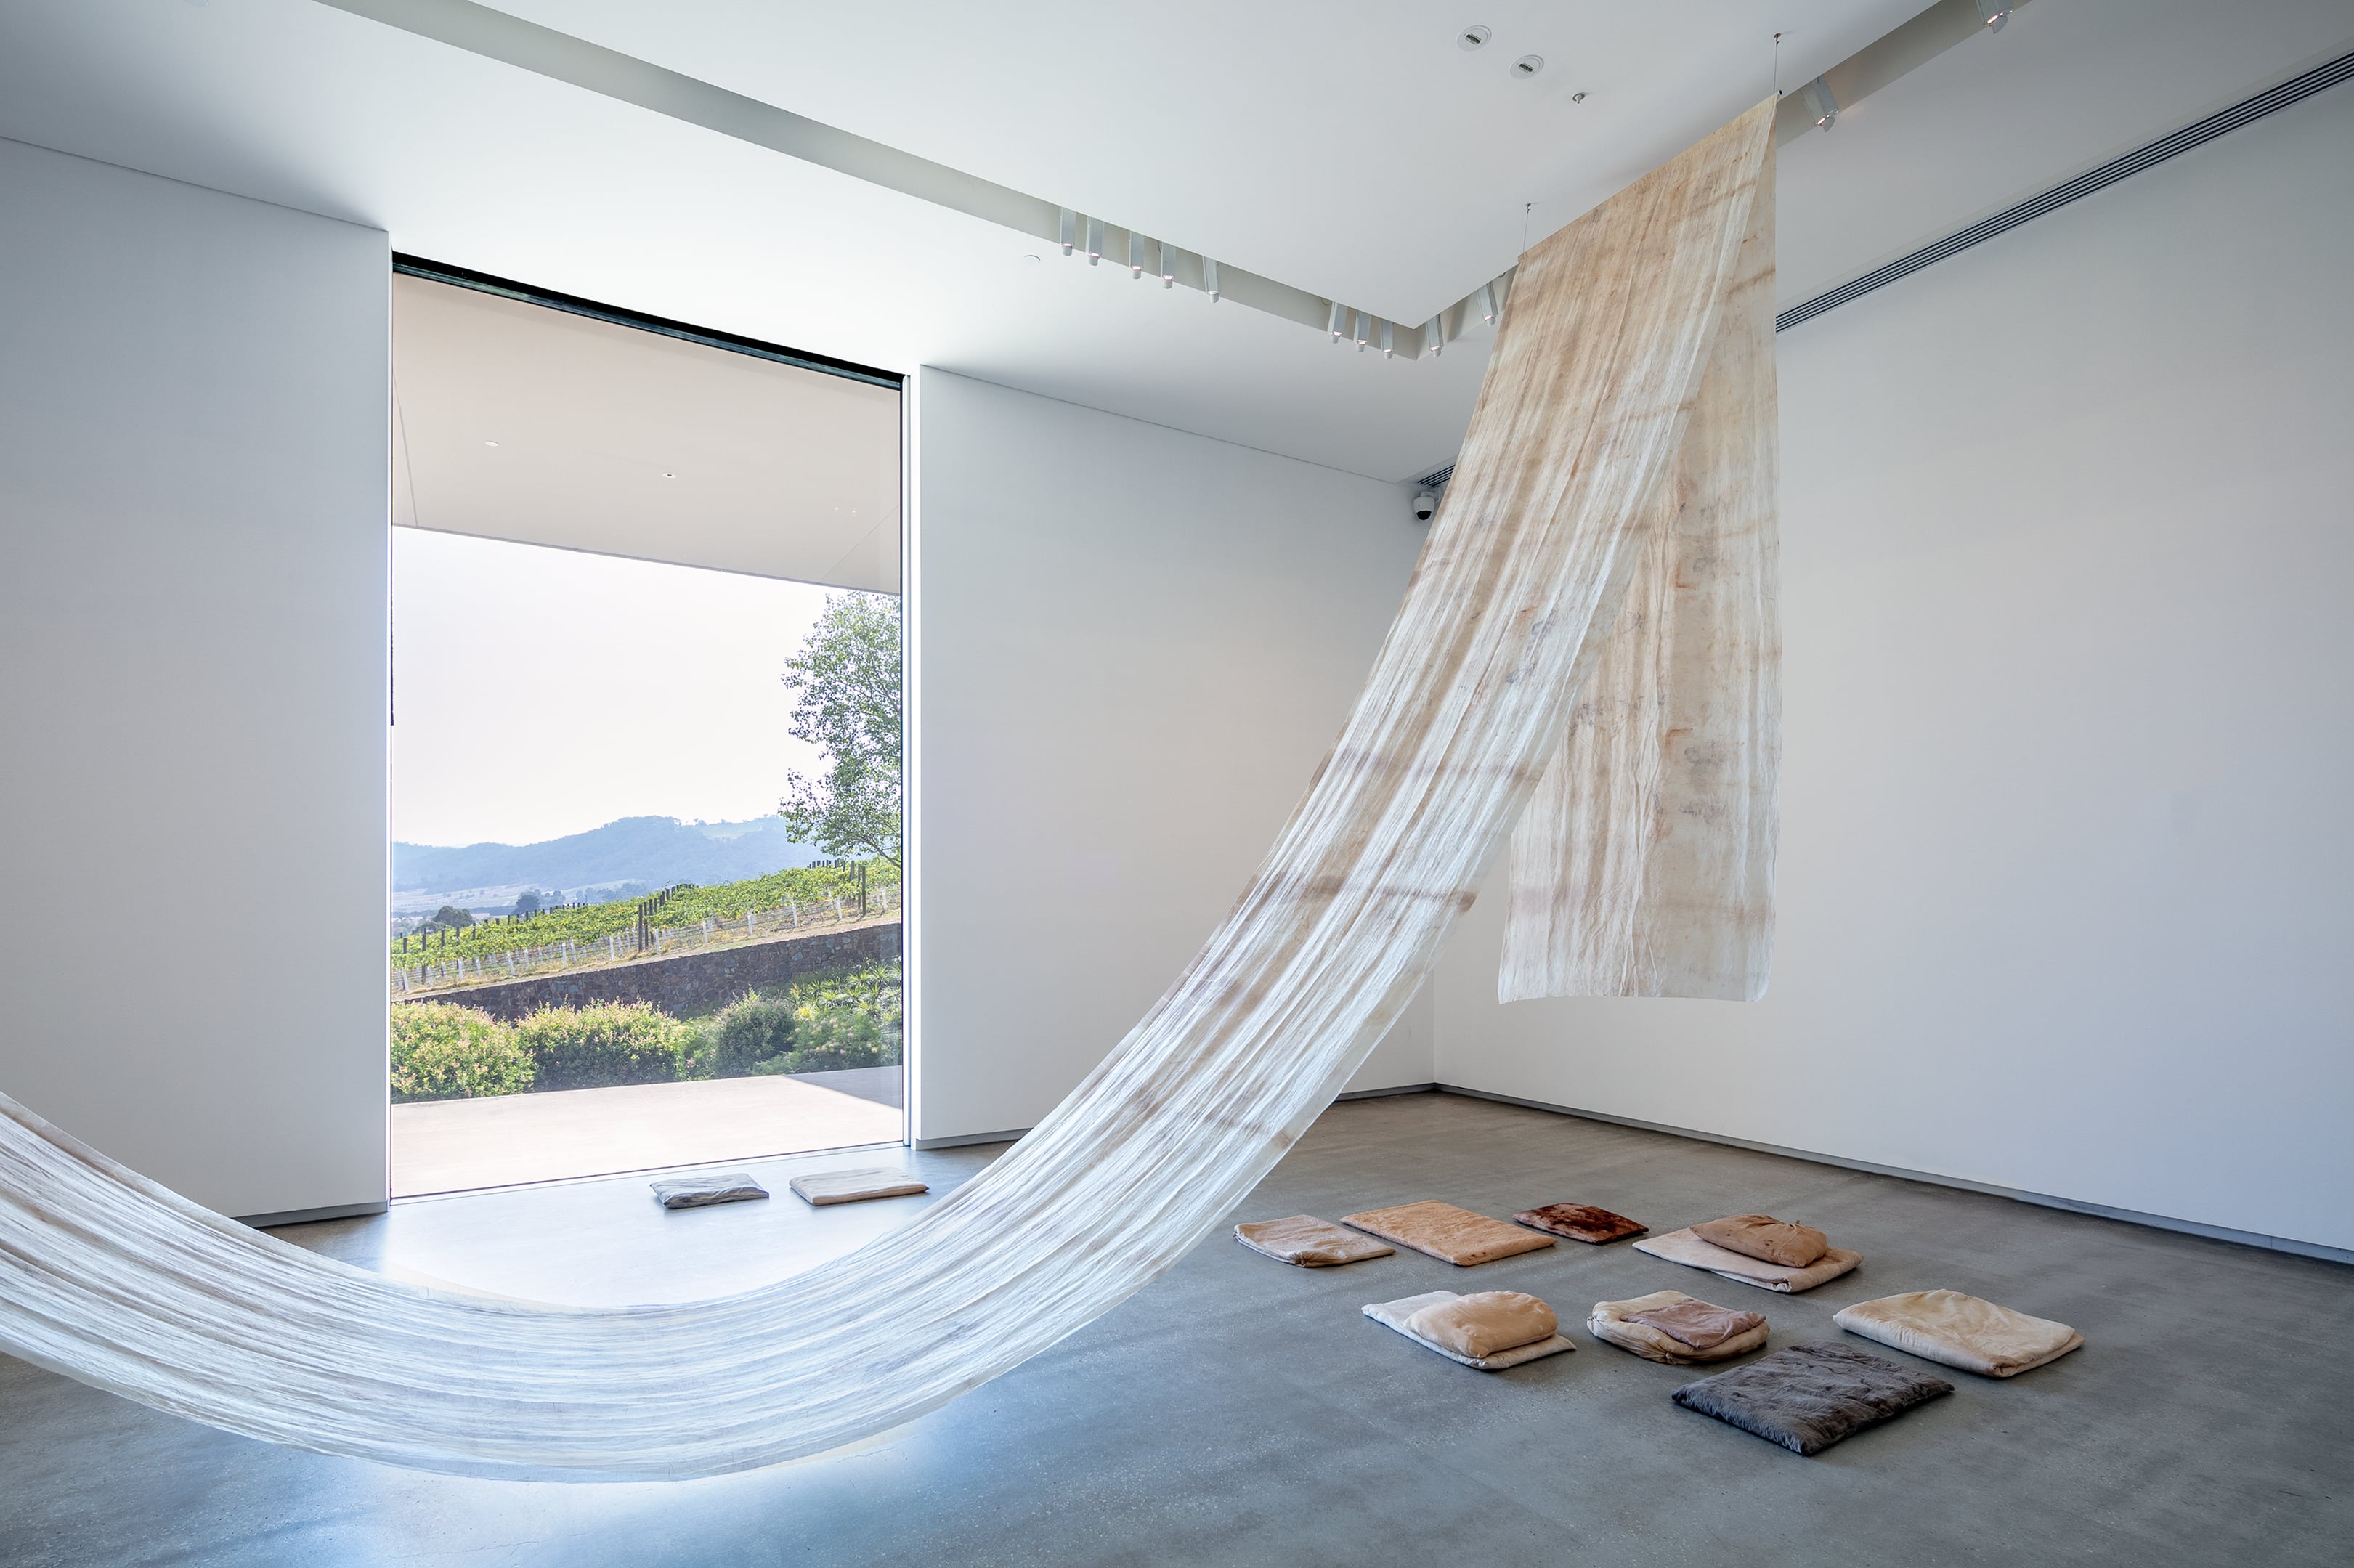 All images: Katie West, 'Clearing' (2018–19), suspended fabric: silk dyed with eucalyptus and wattles collected from area around Maroondah Dam; cushions: silk dyed with eucalyptus leaves and bark; muslin dyed with puff ball fungus; calico dyed with eucalyptus leaves and bark and puff ball fungus; all filled with wool and cotton wadding; sound: composed by Simon Charles with spoken score by Katie West, duration 00:13:00; texts: Kerry Arabena, Aunty Joy Murphy Wandin, Bruce Pascoe and Uncle David Wandin in partnership with Yarra Ranges Council, Dixon’s Creek Primary School, Ralph Hume, Victor Steffensen and Brett Ellis. Image courtesy of the artist. Photo credit: Andrew Curtis